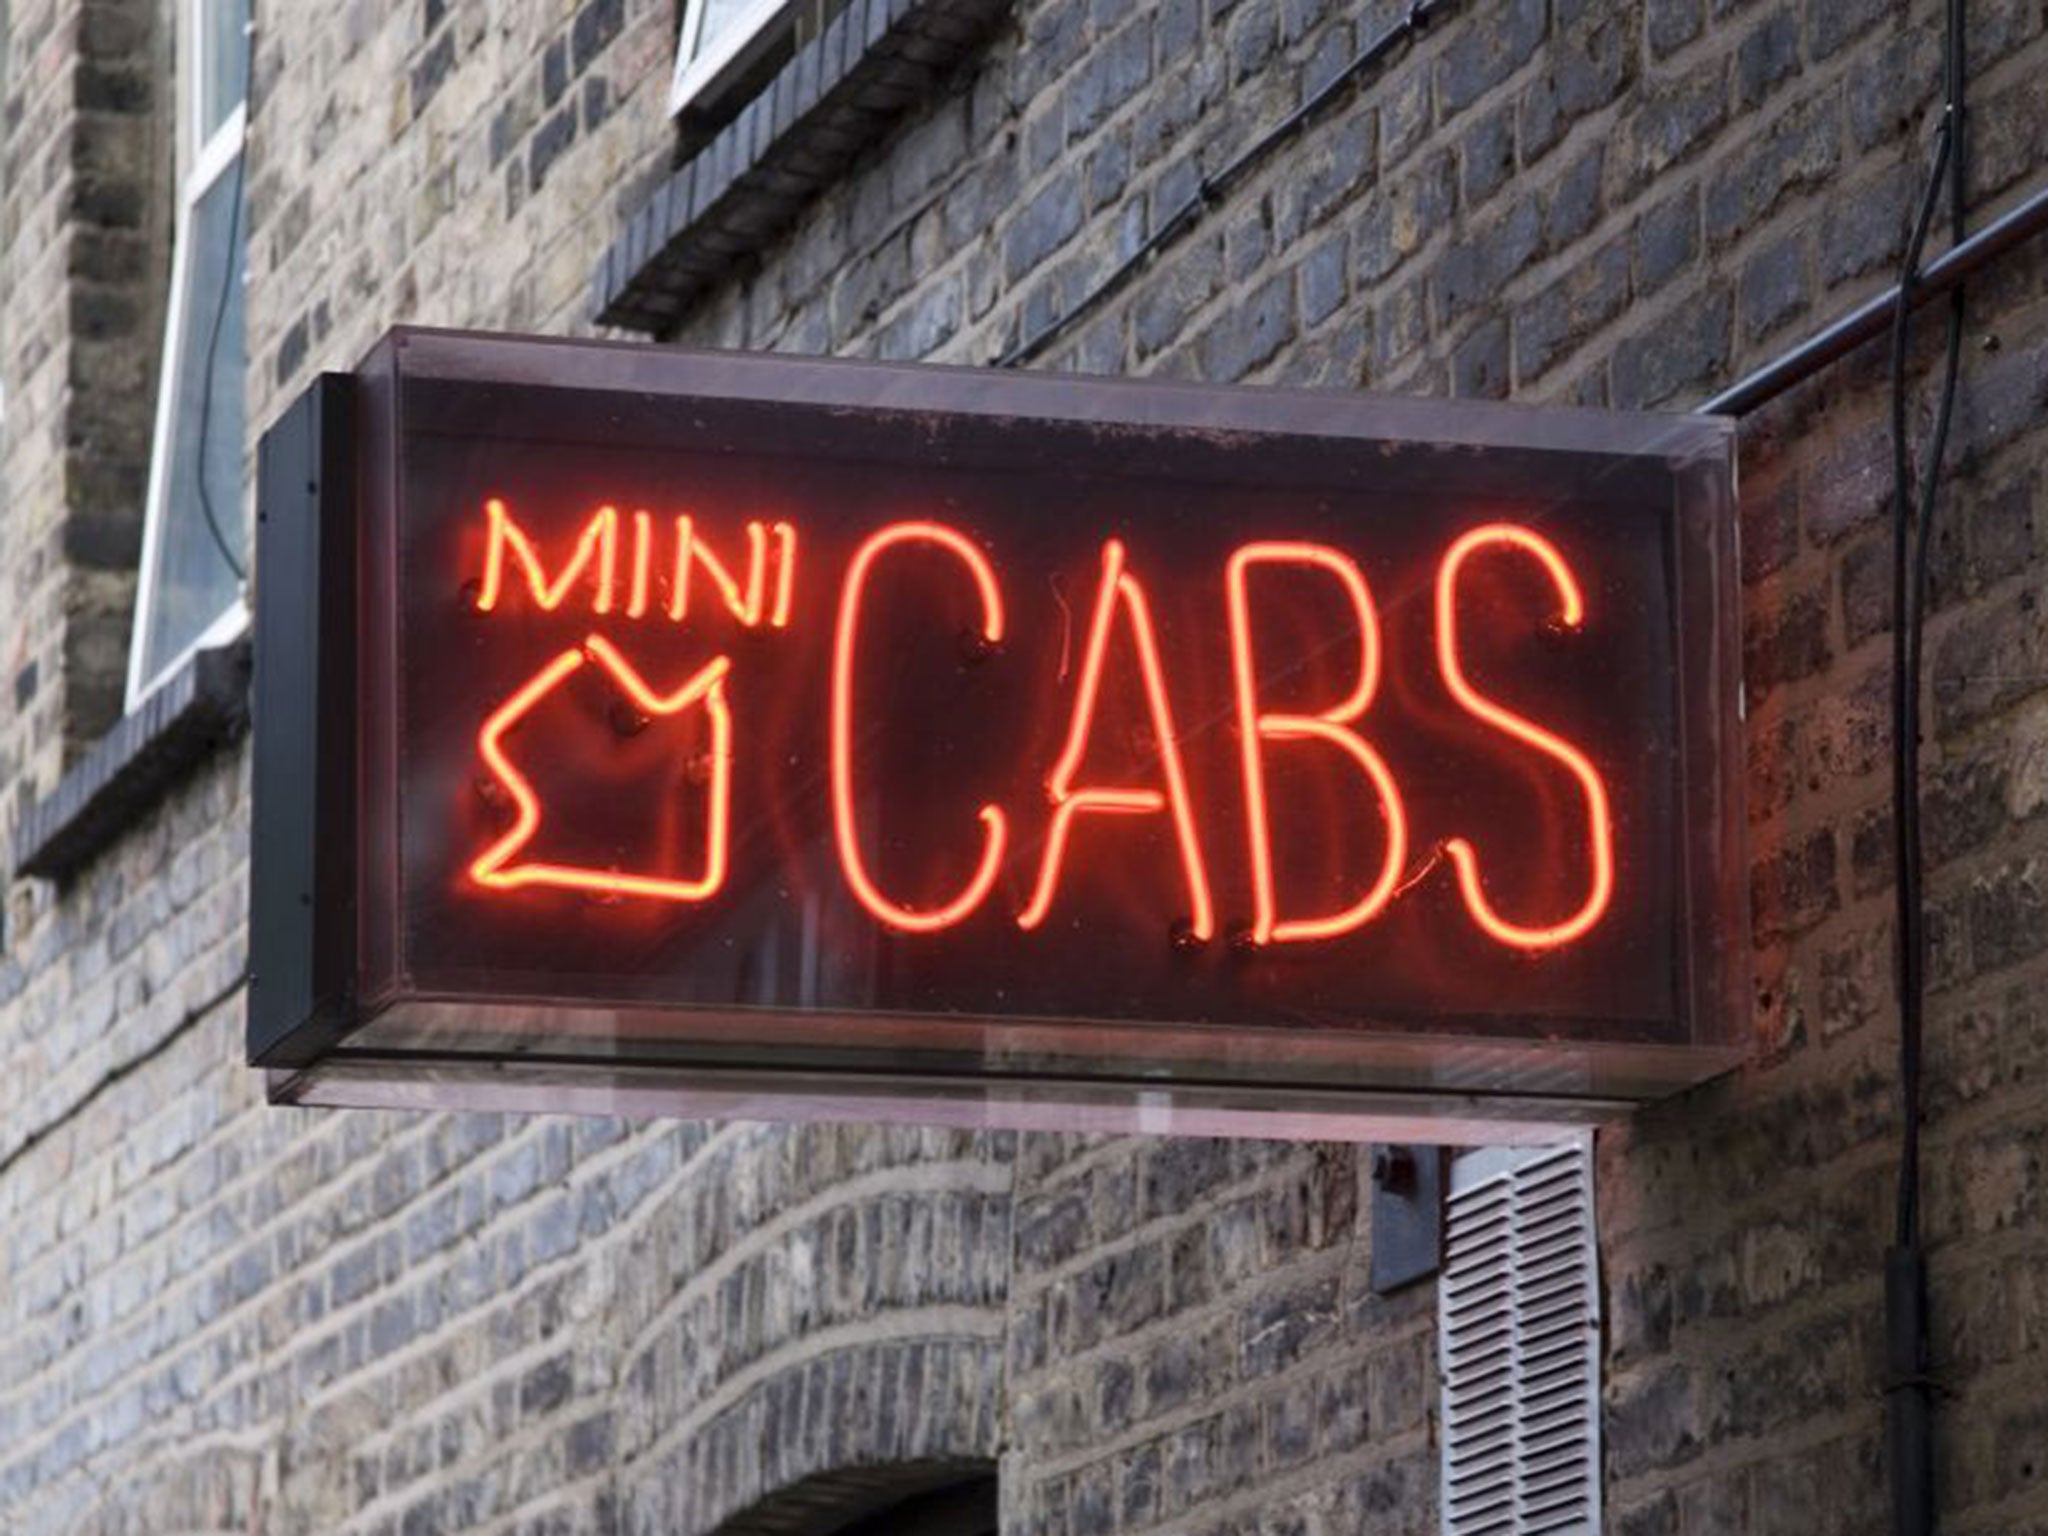 A minicab firm in Rochdale said it has been supplying white drivers to customers on request